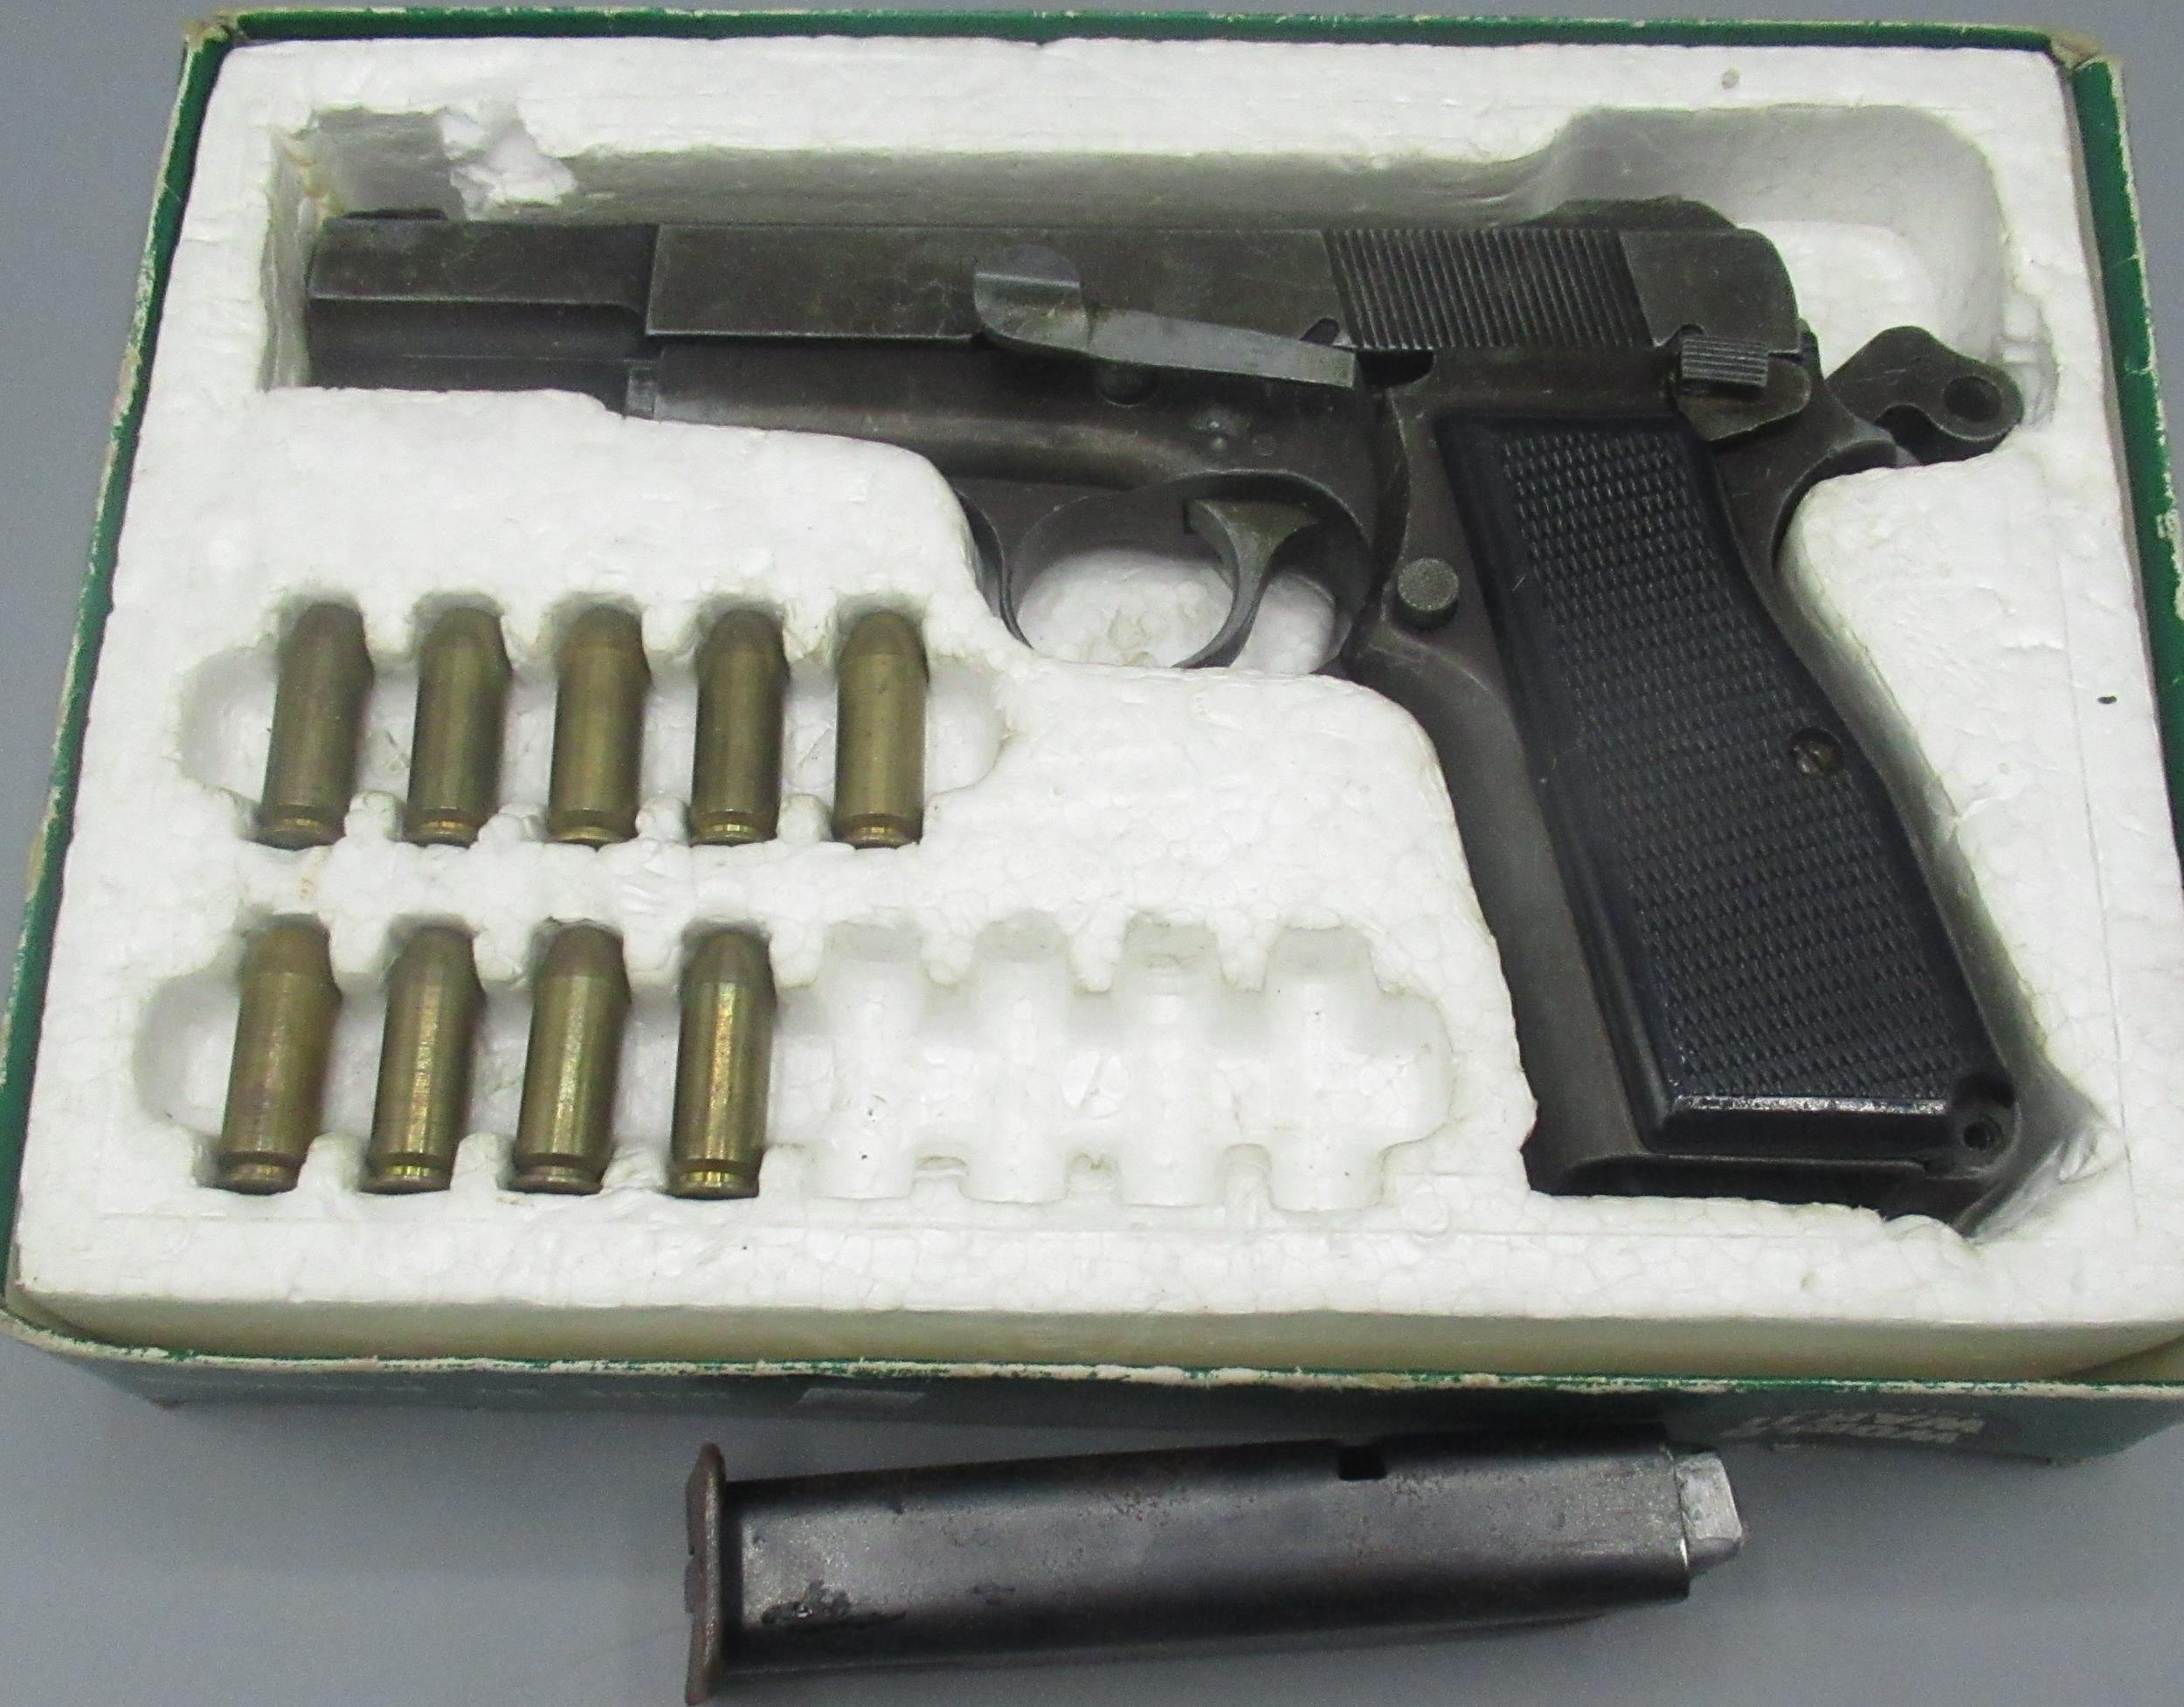 Browning HI-Power pistol made by Marushin, in original box with 9 